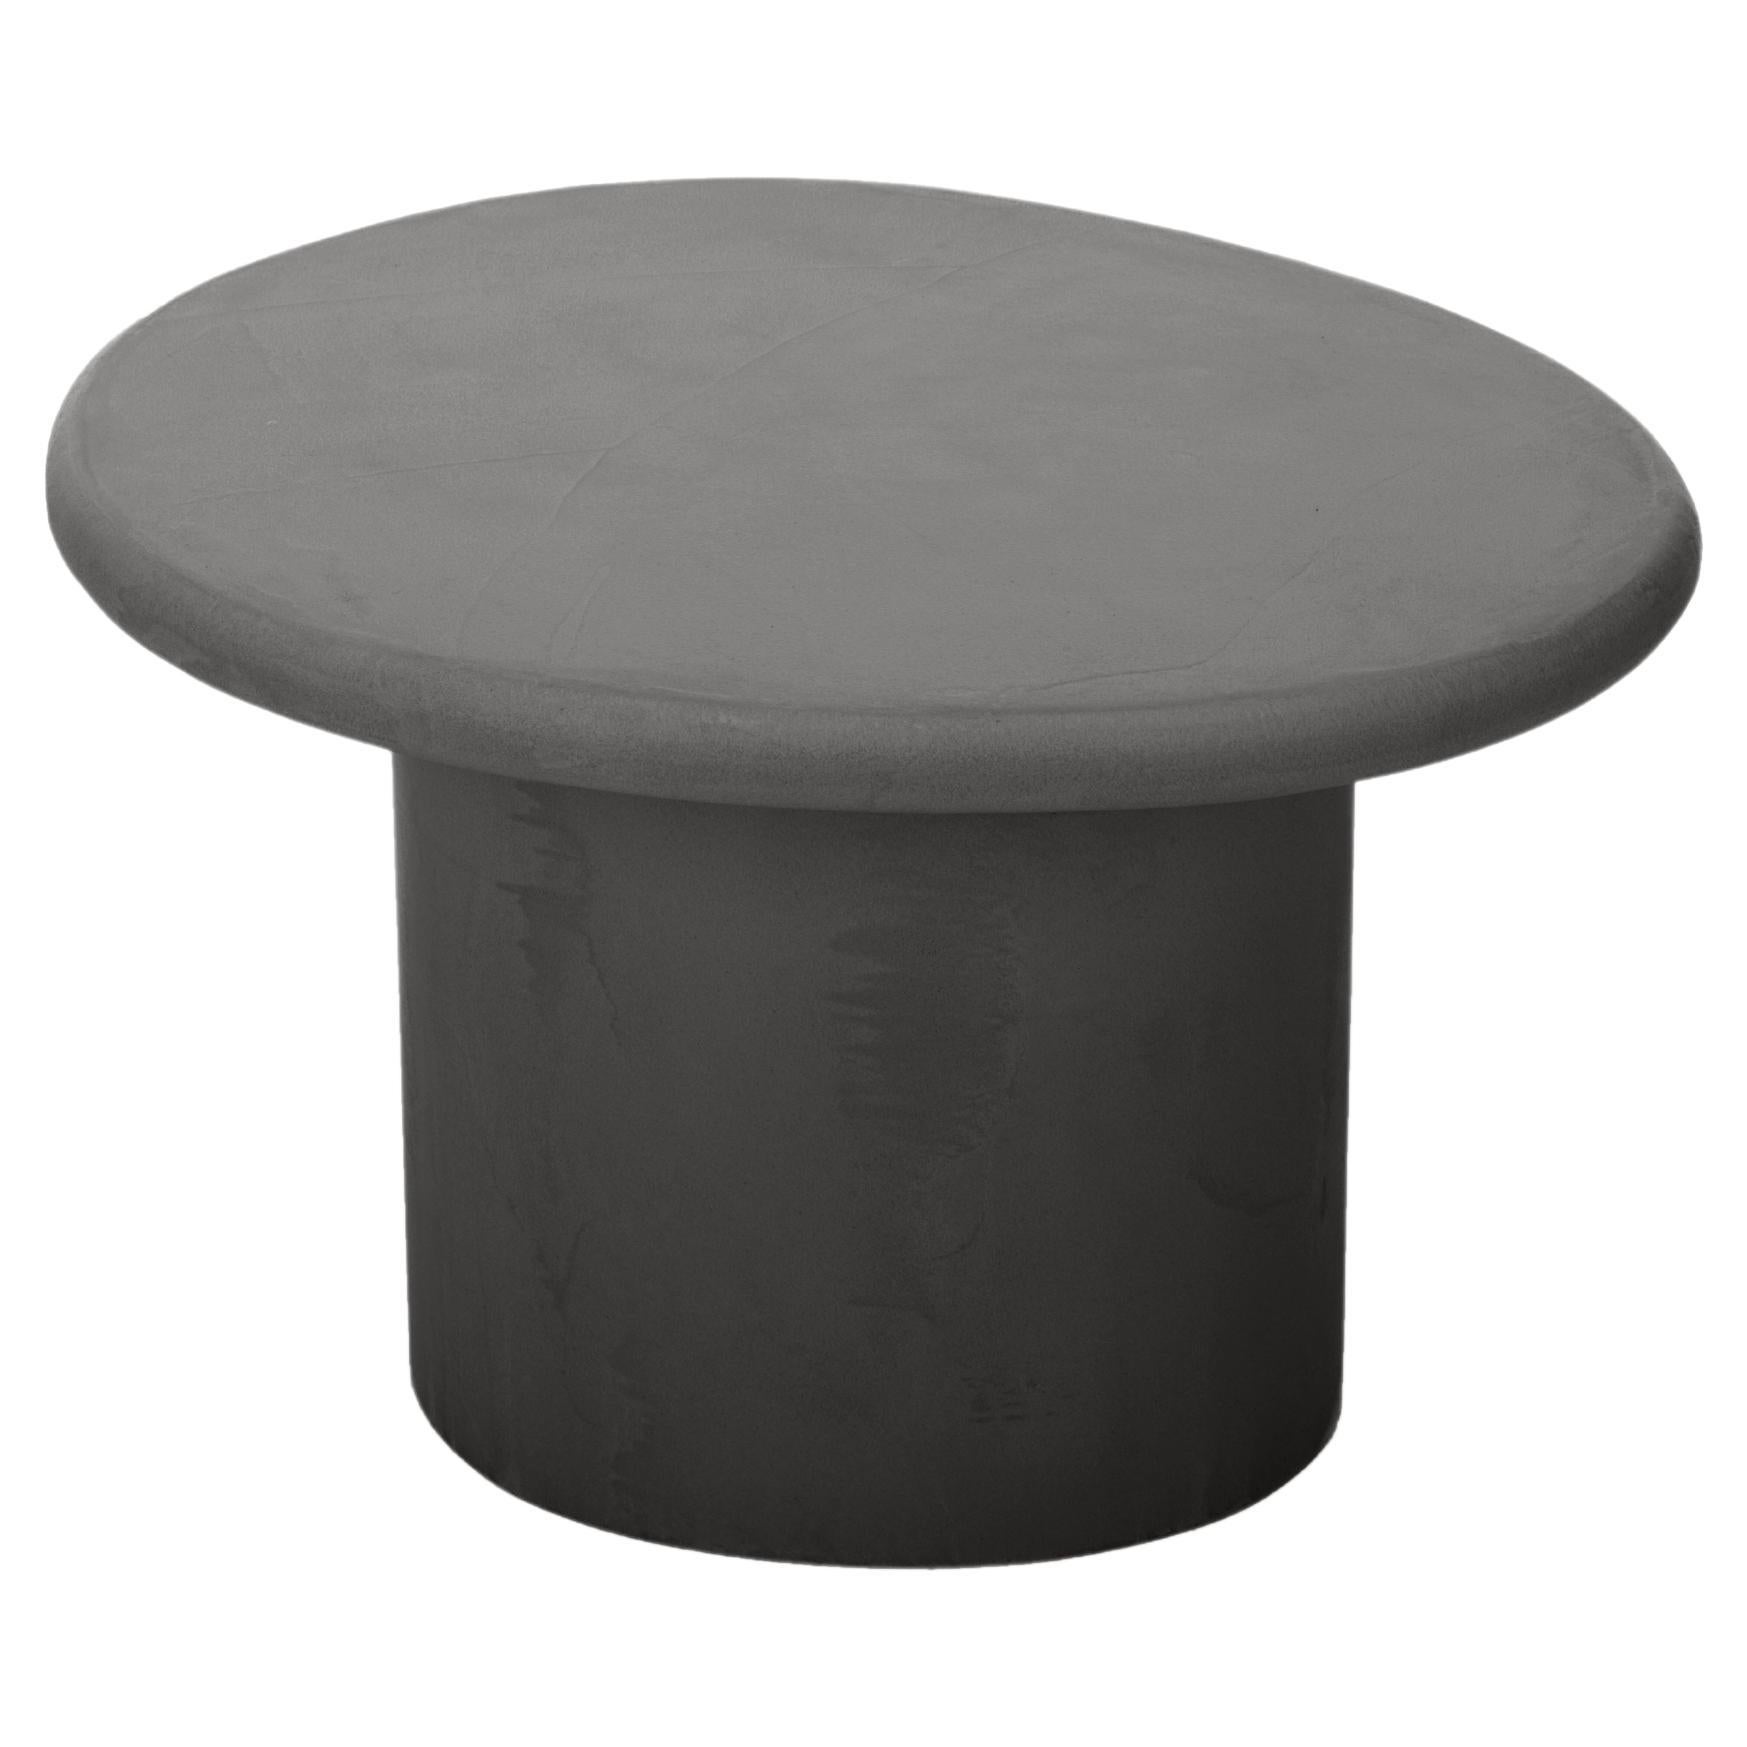 Organic Shaped Mortex Coffee Table "Sami 01" BM57 by Isabelle Beaumont